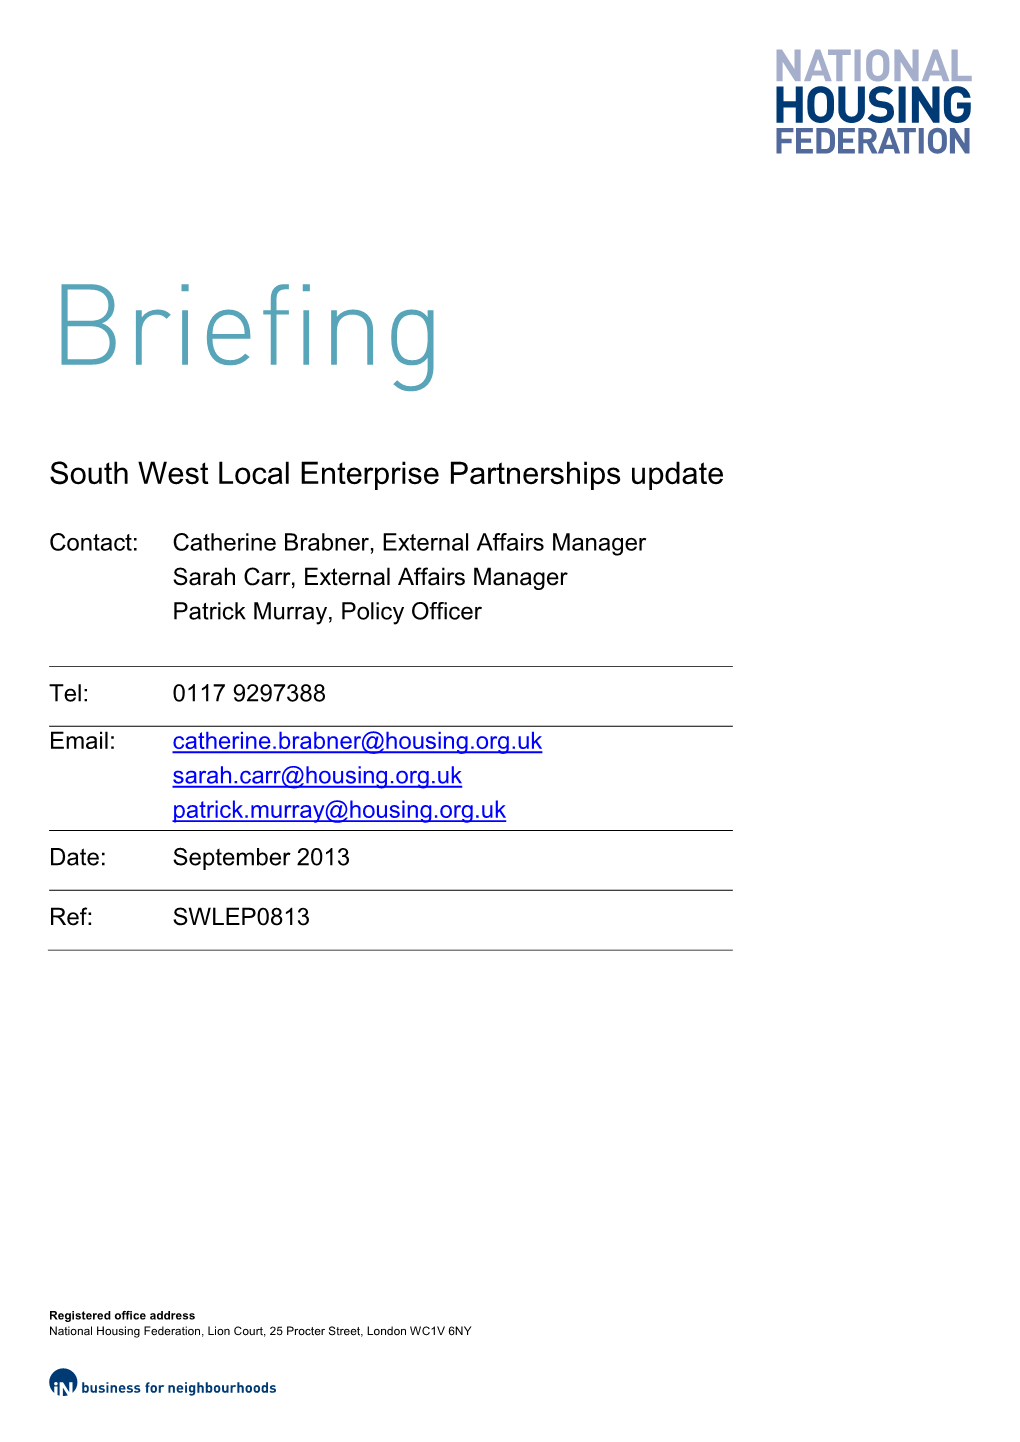 South West Local Enterprise Partnerships Update